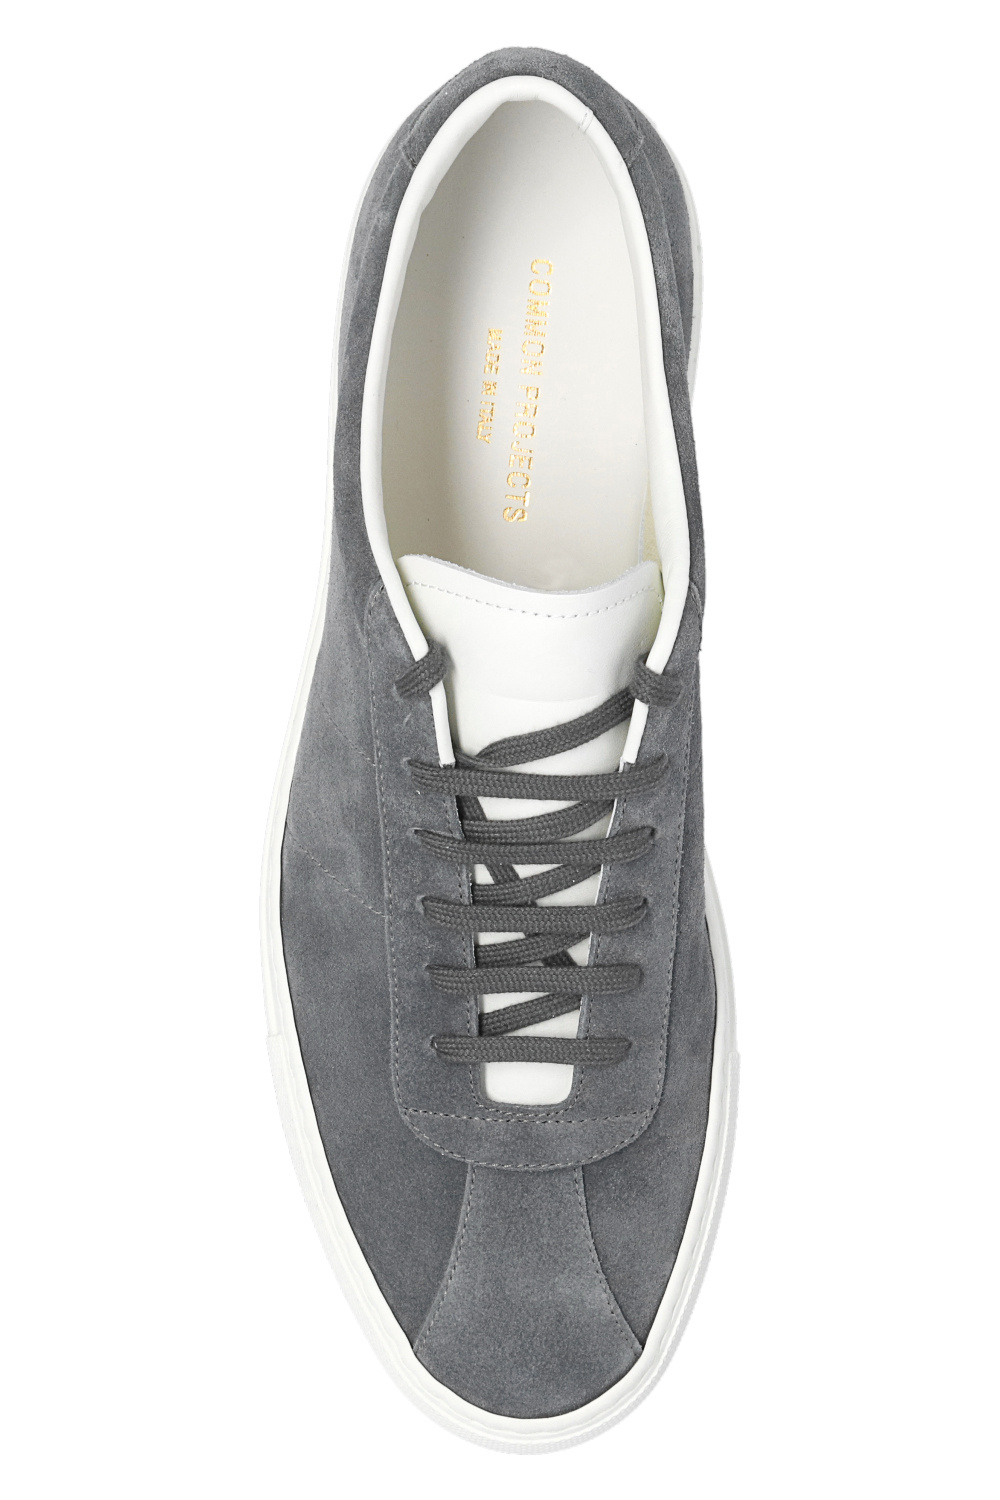 Common Projects ‘Summer Edition’ sneakers Men's Shoes Vitkac